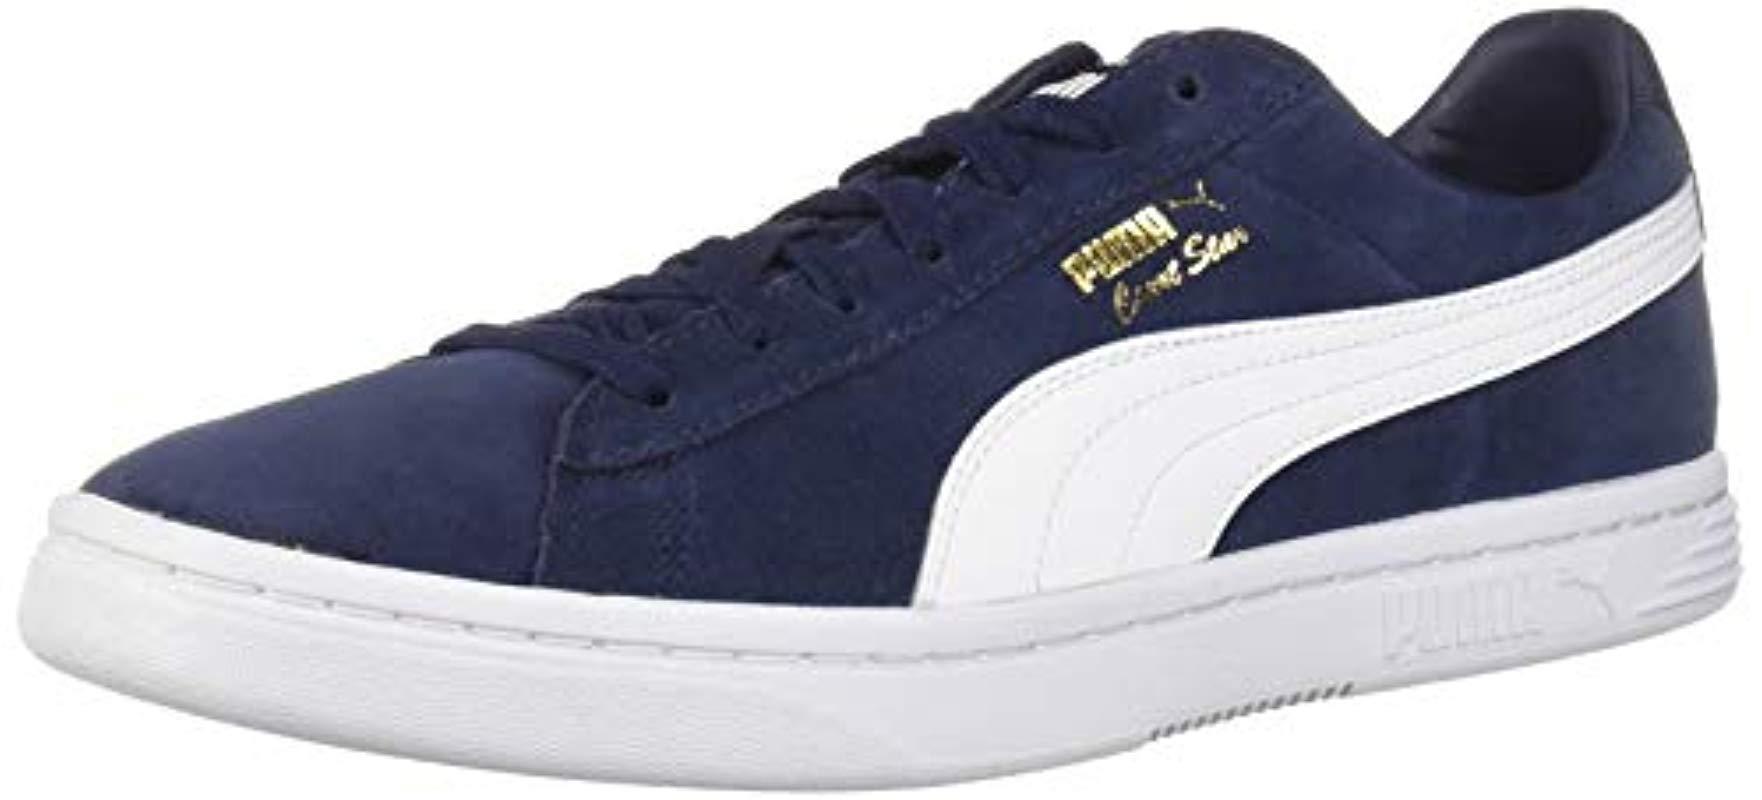 PUMA Court Star Sneaker in Blue for Men - Save 13% - Lyst